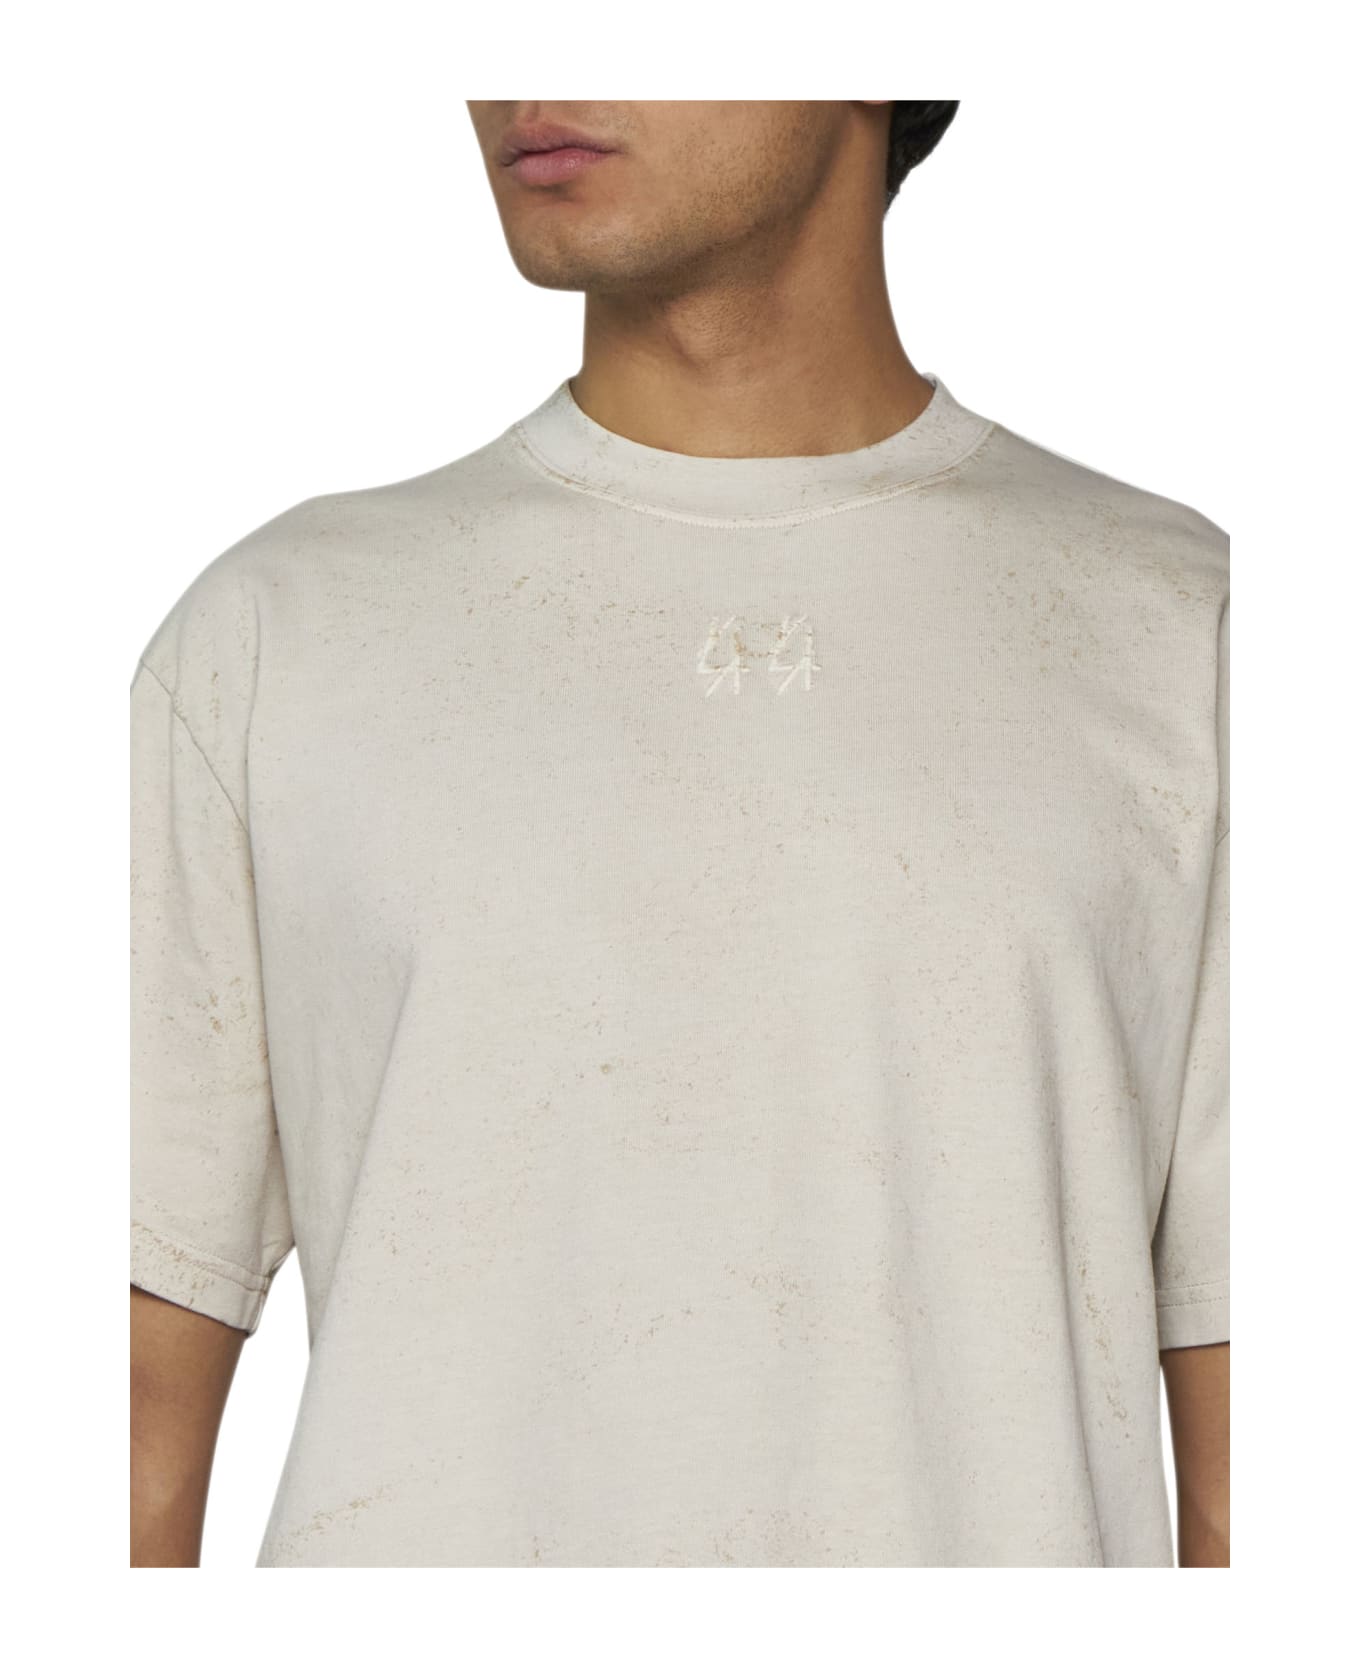 44 Label Group T-Shirt - Dirty white+gyps